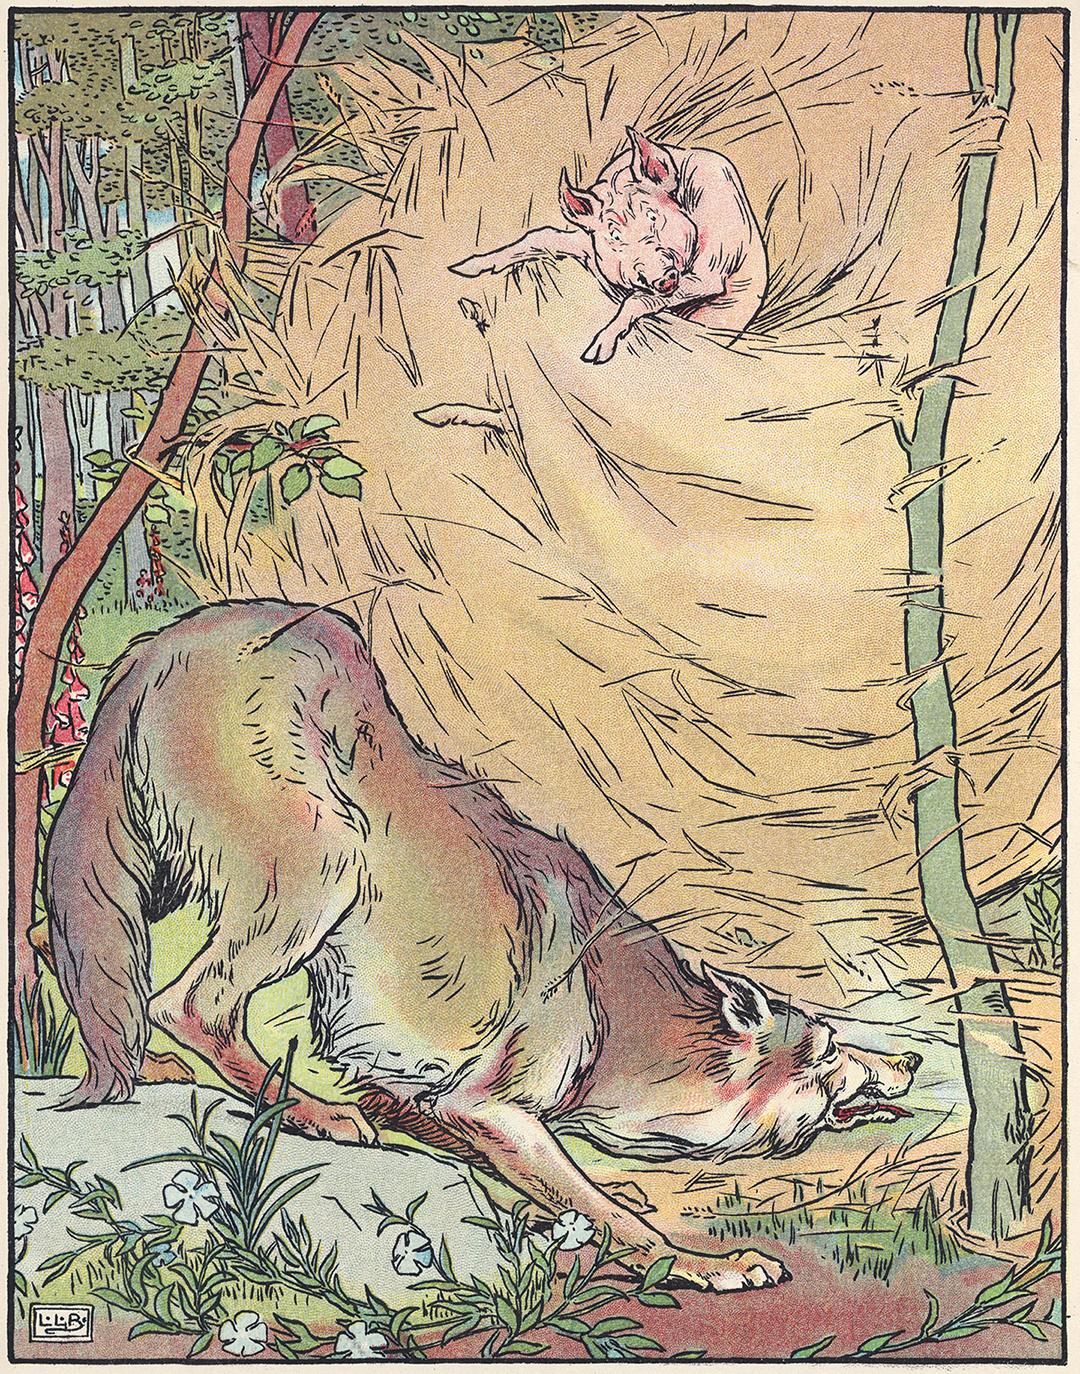 An illustrated plate of the wolf blowing down the pigs' straw house from the 1904 adaptation of "The Three Little Pigs" by L. Leslie Brooke. Library of Congress. (Public Domain)